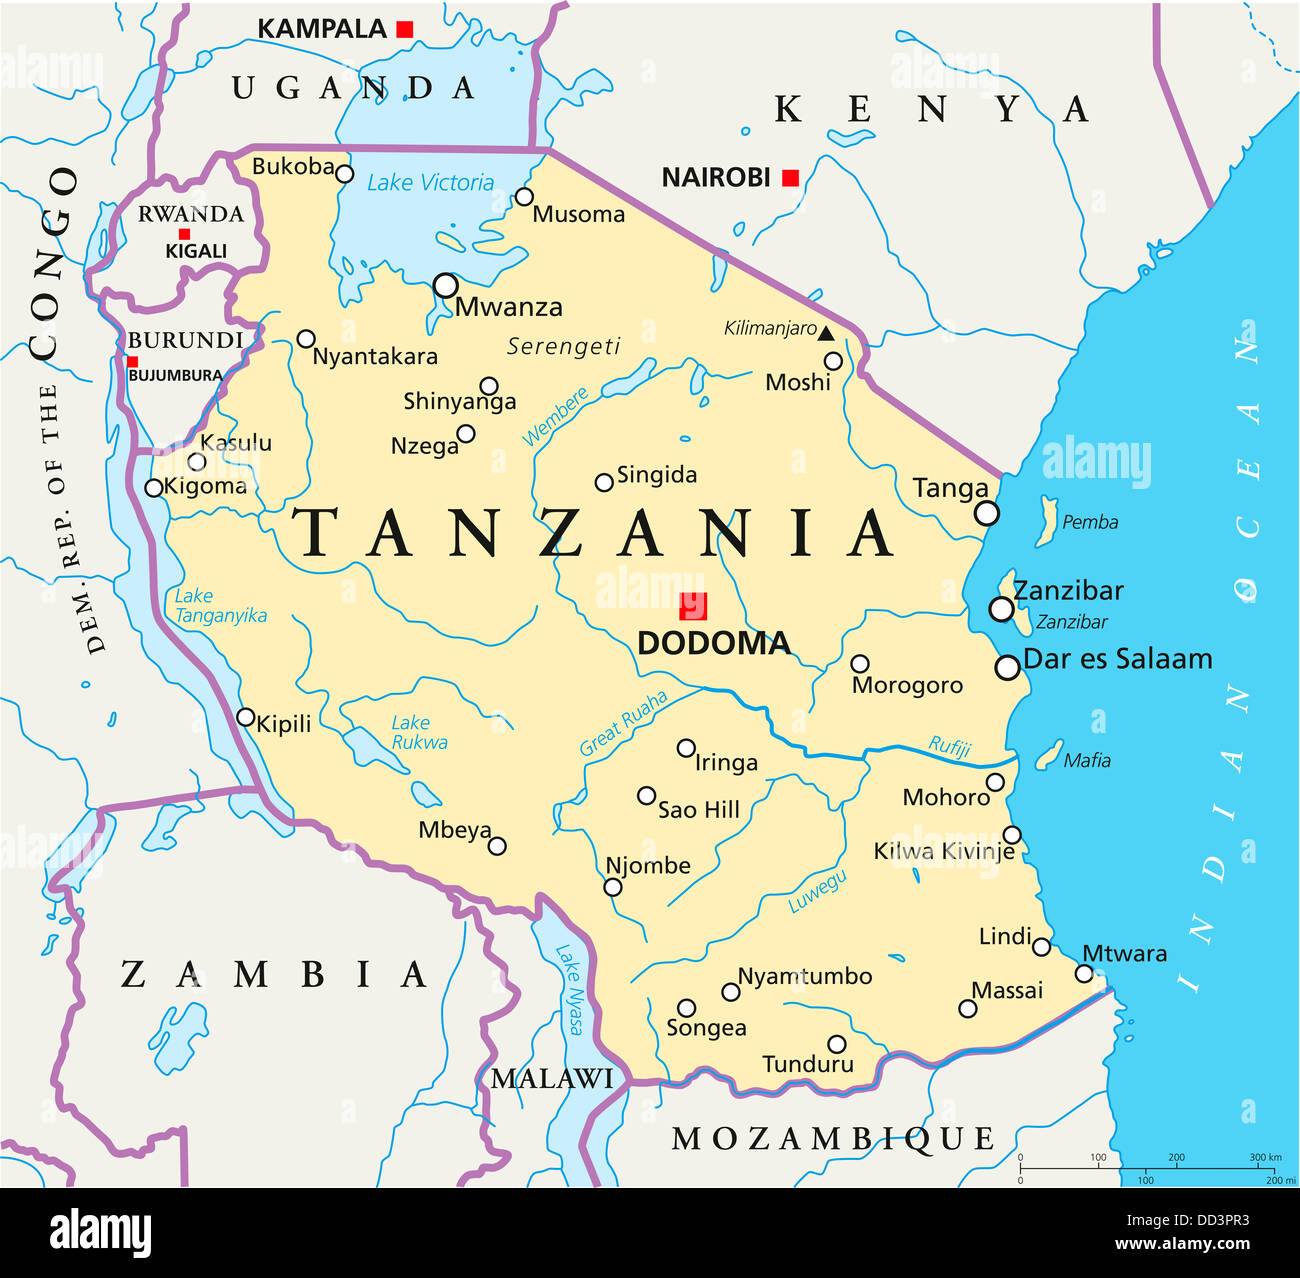 Political map of Tanzania with capital Dodoma, national borders, important cities, rivers, lakes. English labeling and scale. Stock Photo